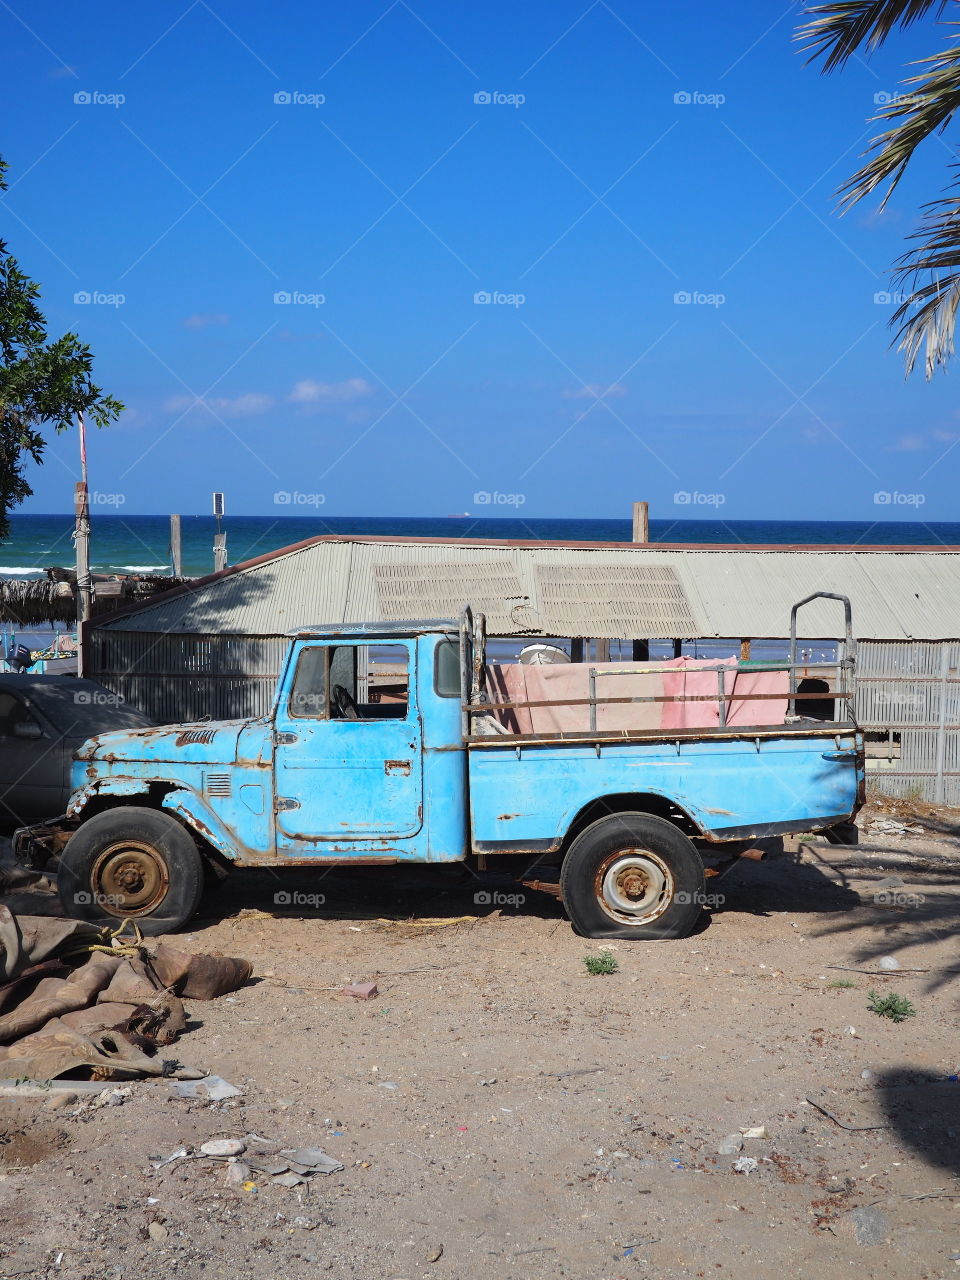 Abandoned vehicle by the beach